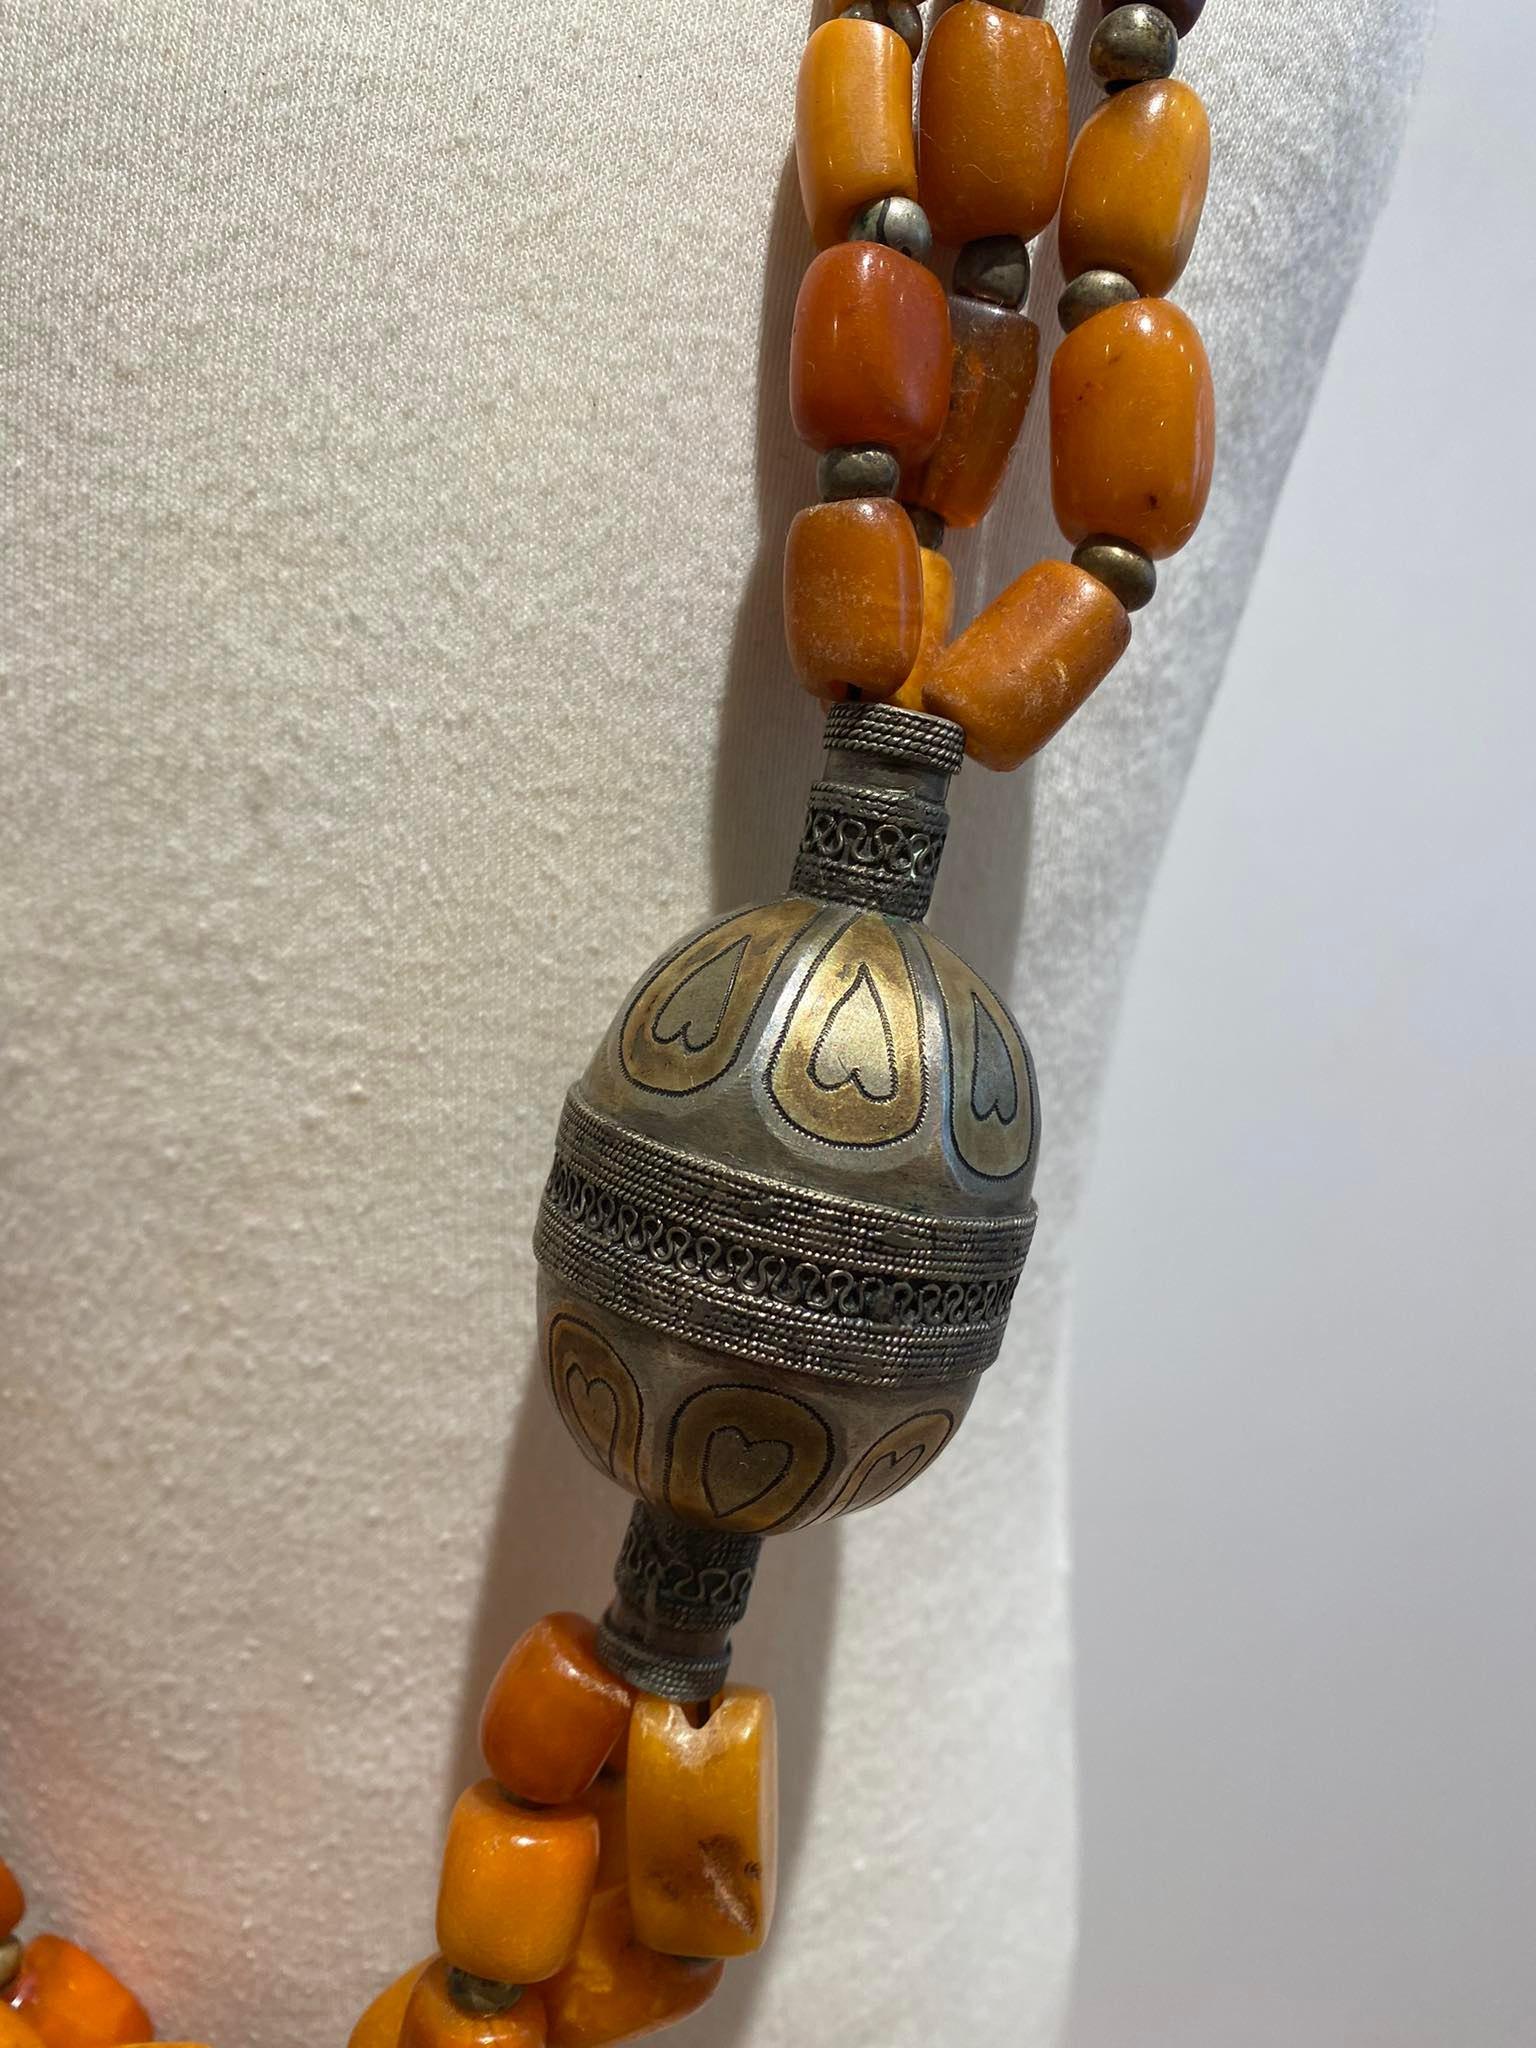  Antique Amber Necklace Yemen Afghanistan 18/19th Century Islamic Art silver  For Sale 12